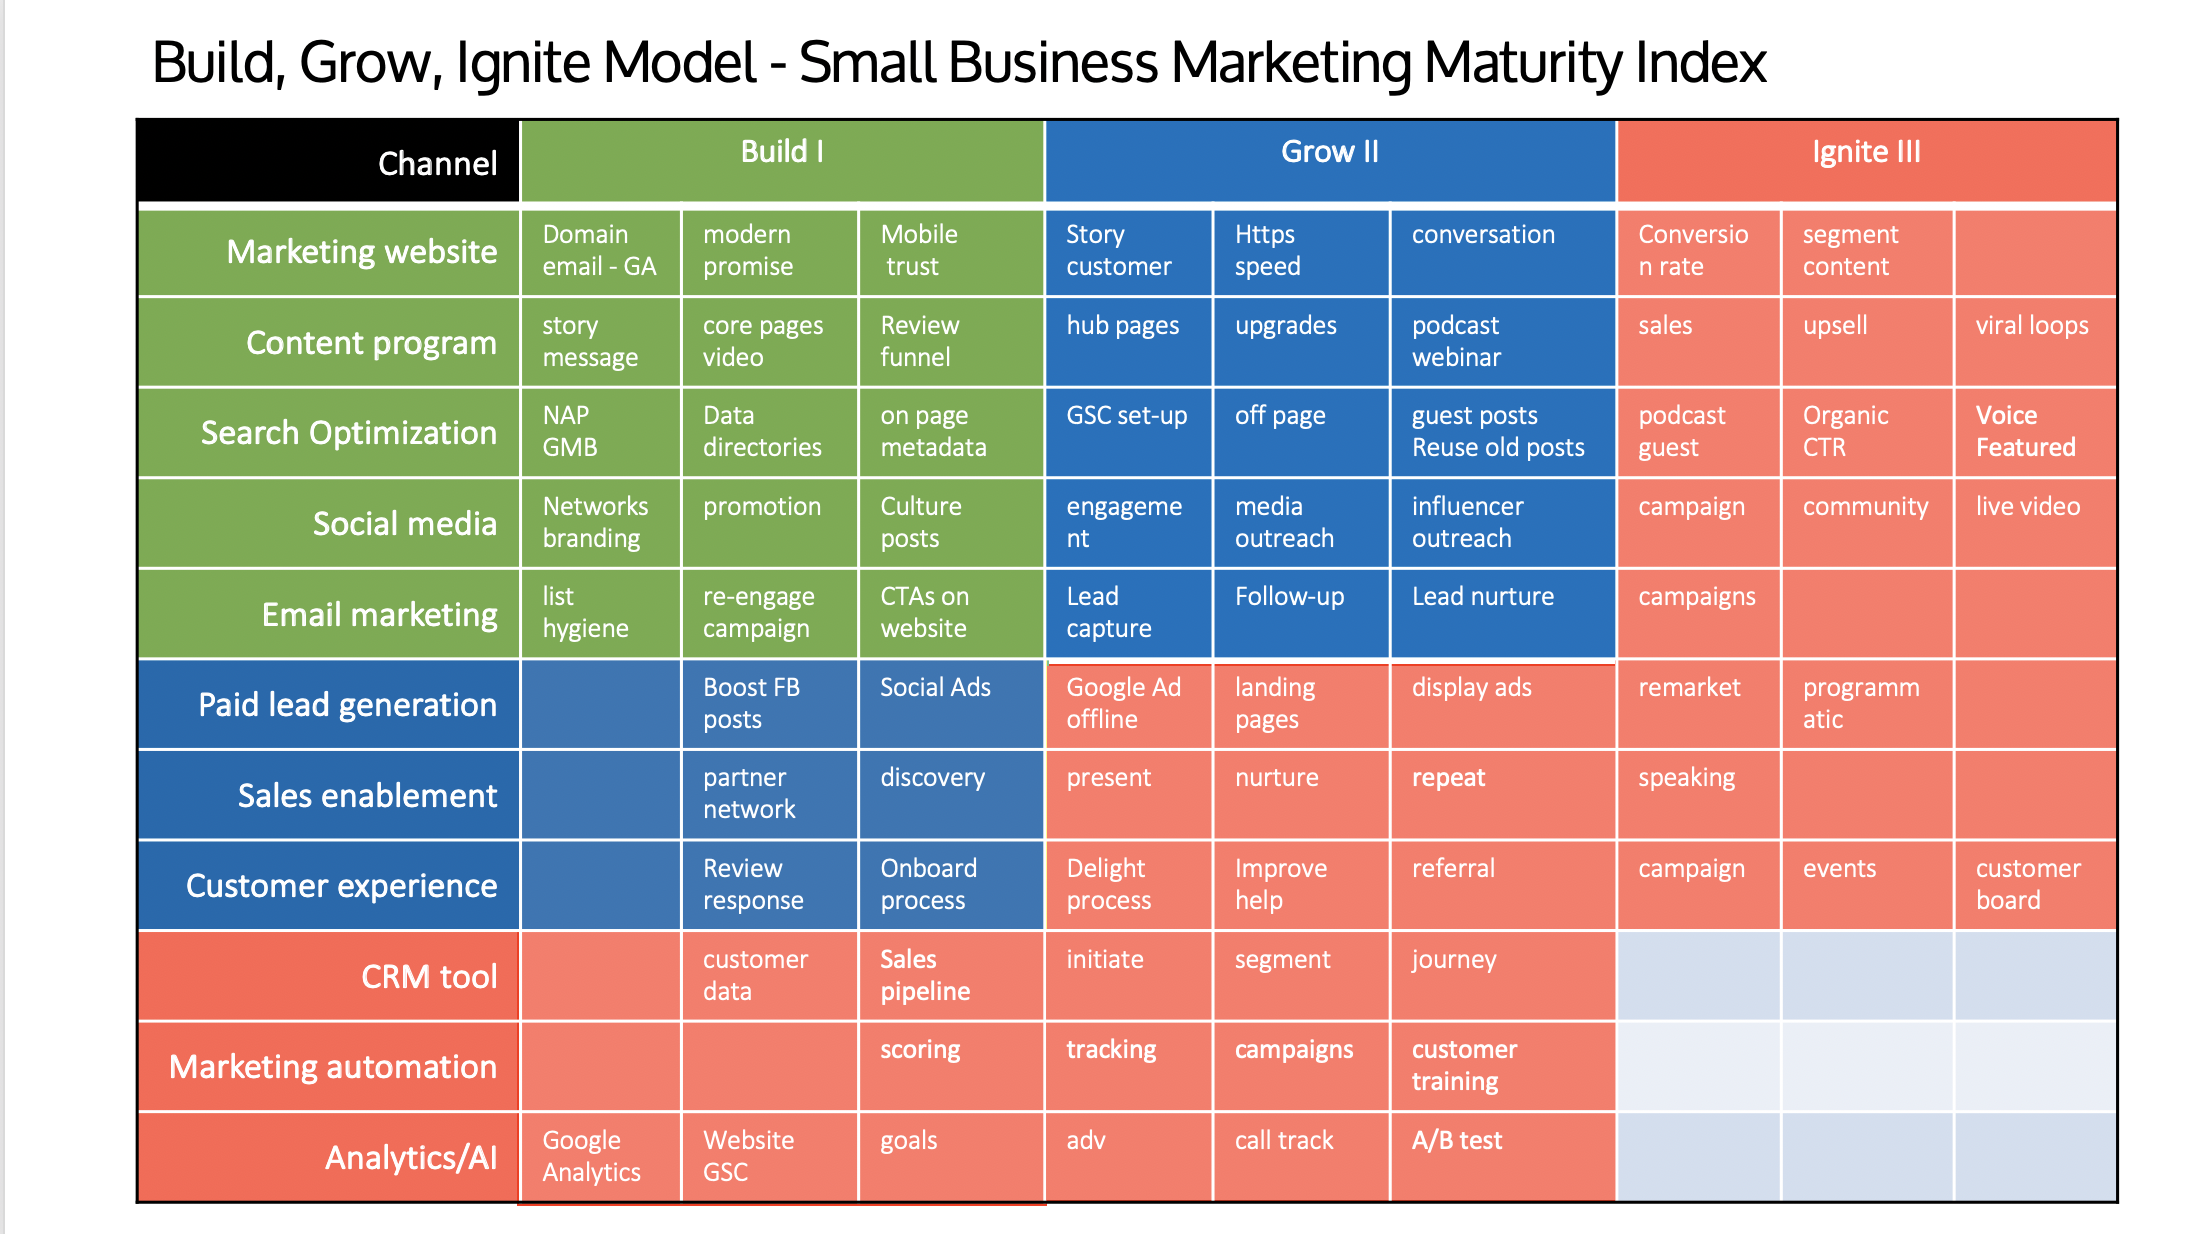 Marketing Maturity Model for Small Business